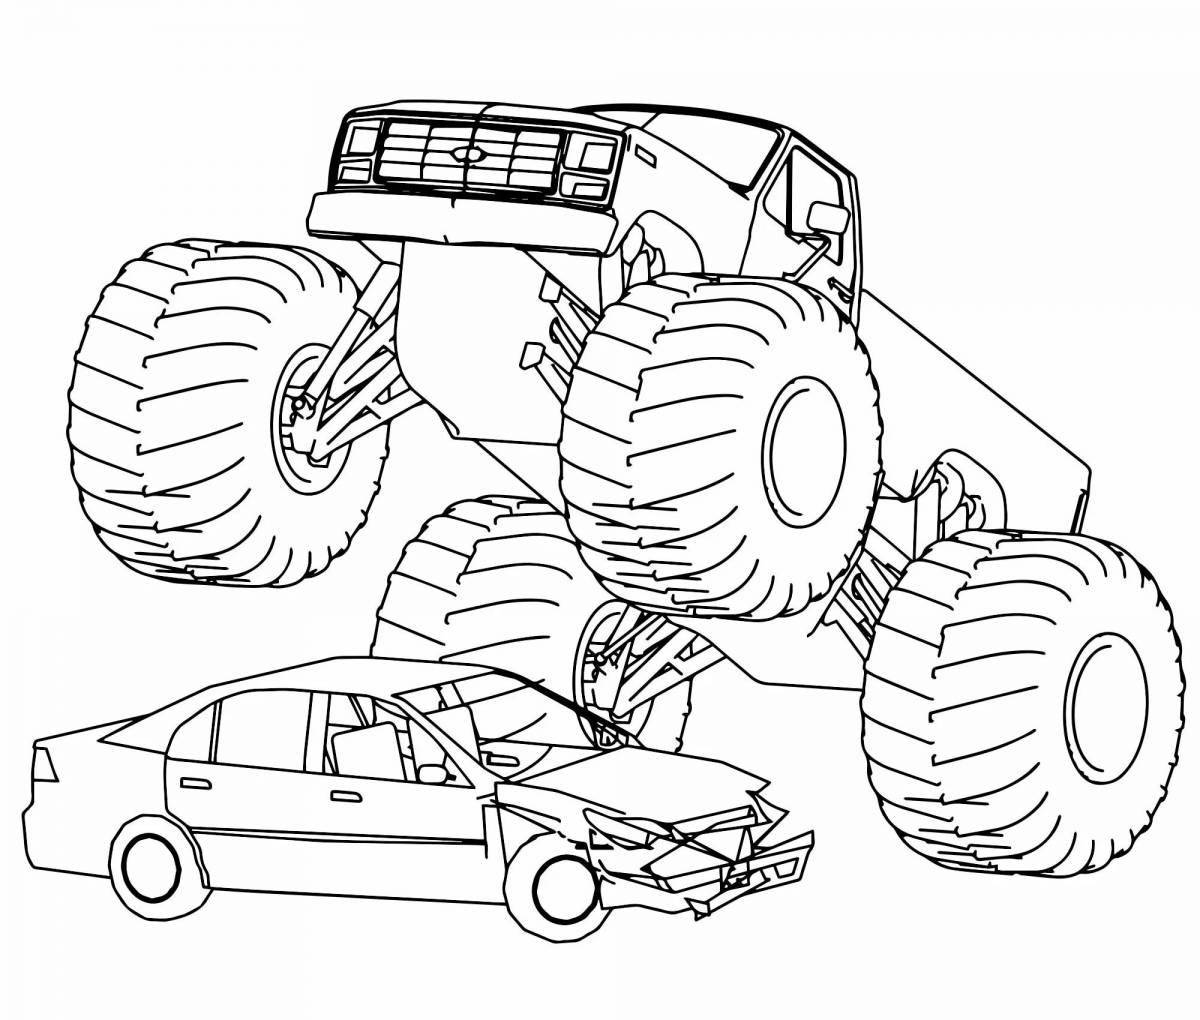 Colorful bigfoot machine coloring page